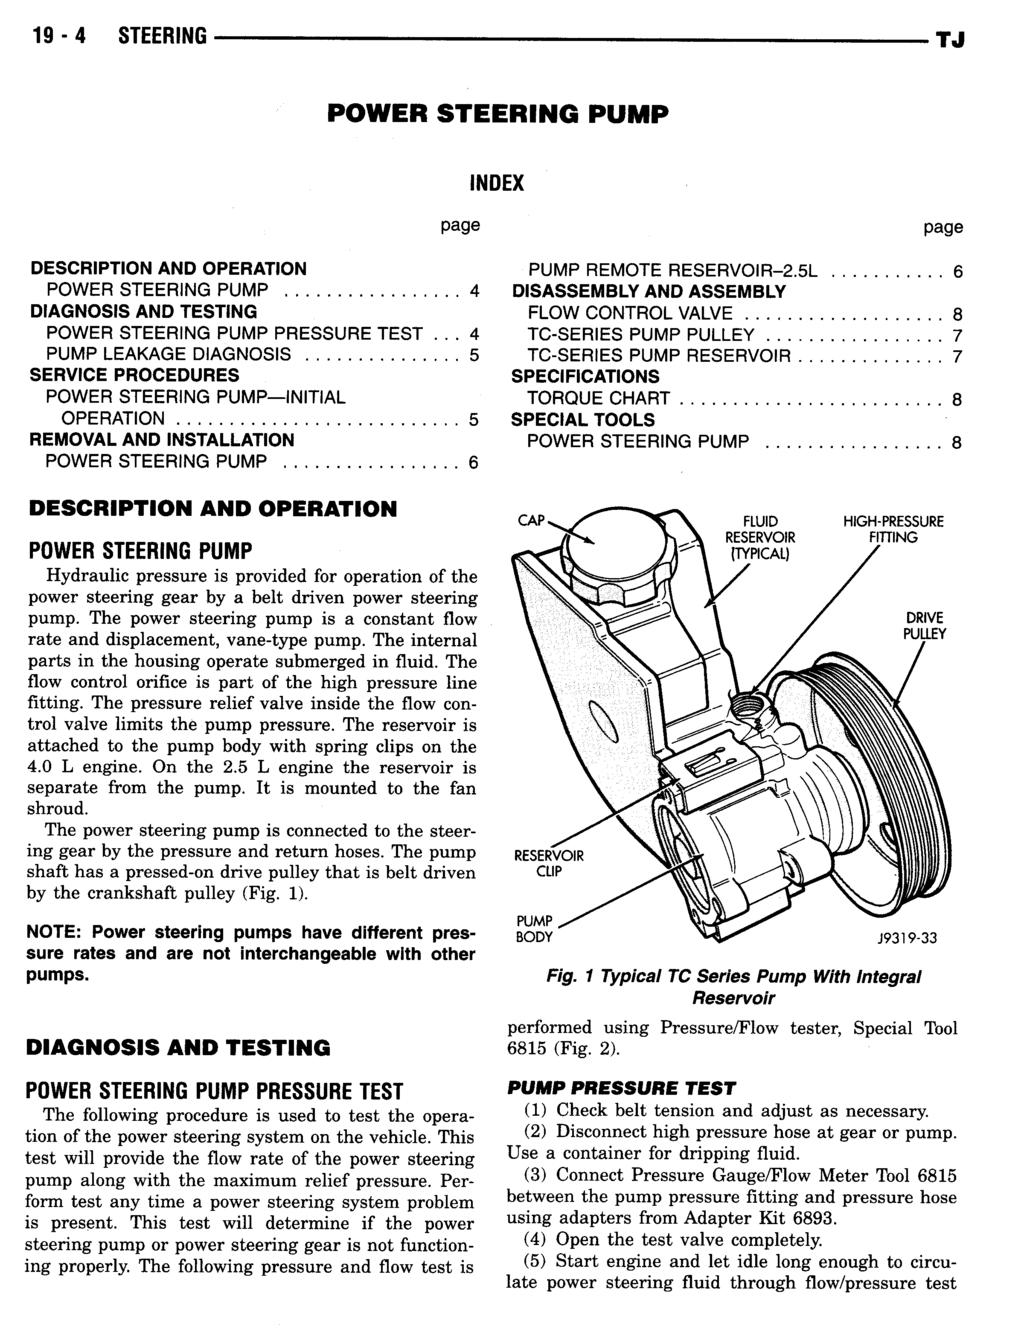 19-4 STEERING POWER STEERING PUMP INDEX page page DESCRIPTION AND OPERATION PUMP REMOTE RESERVOIR-2.5L........... 6 POWER STEERING PUMP.